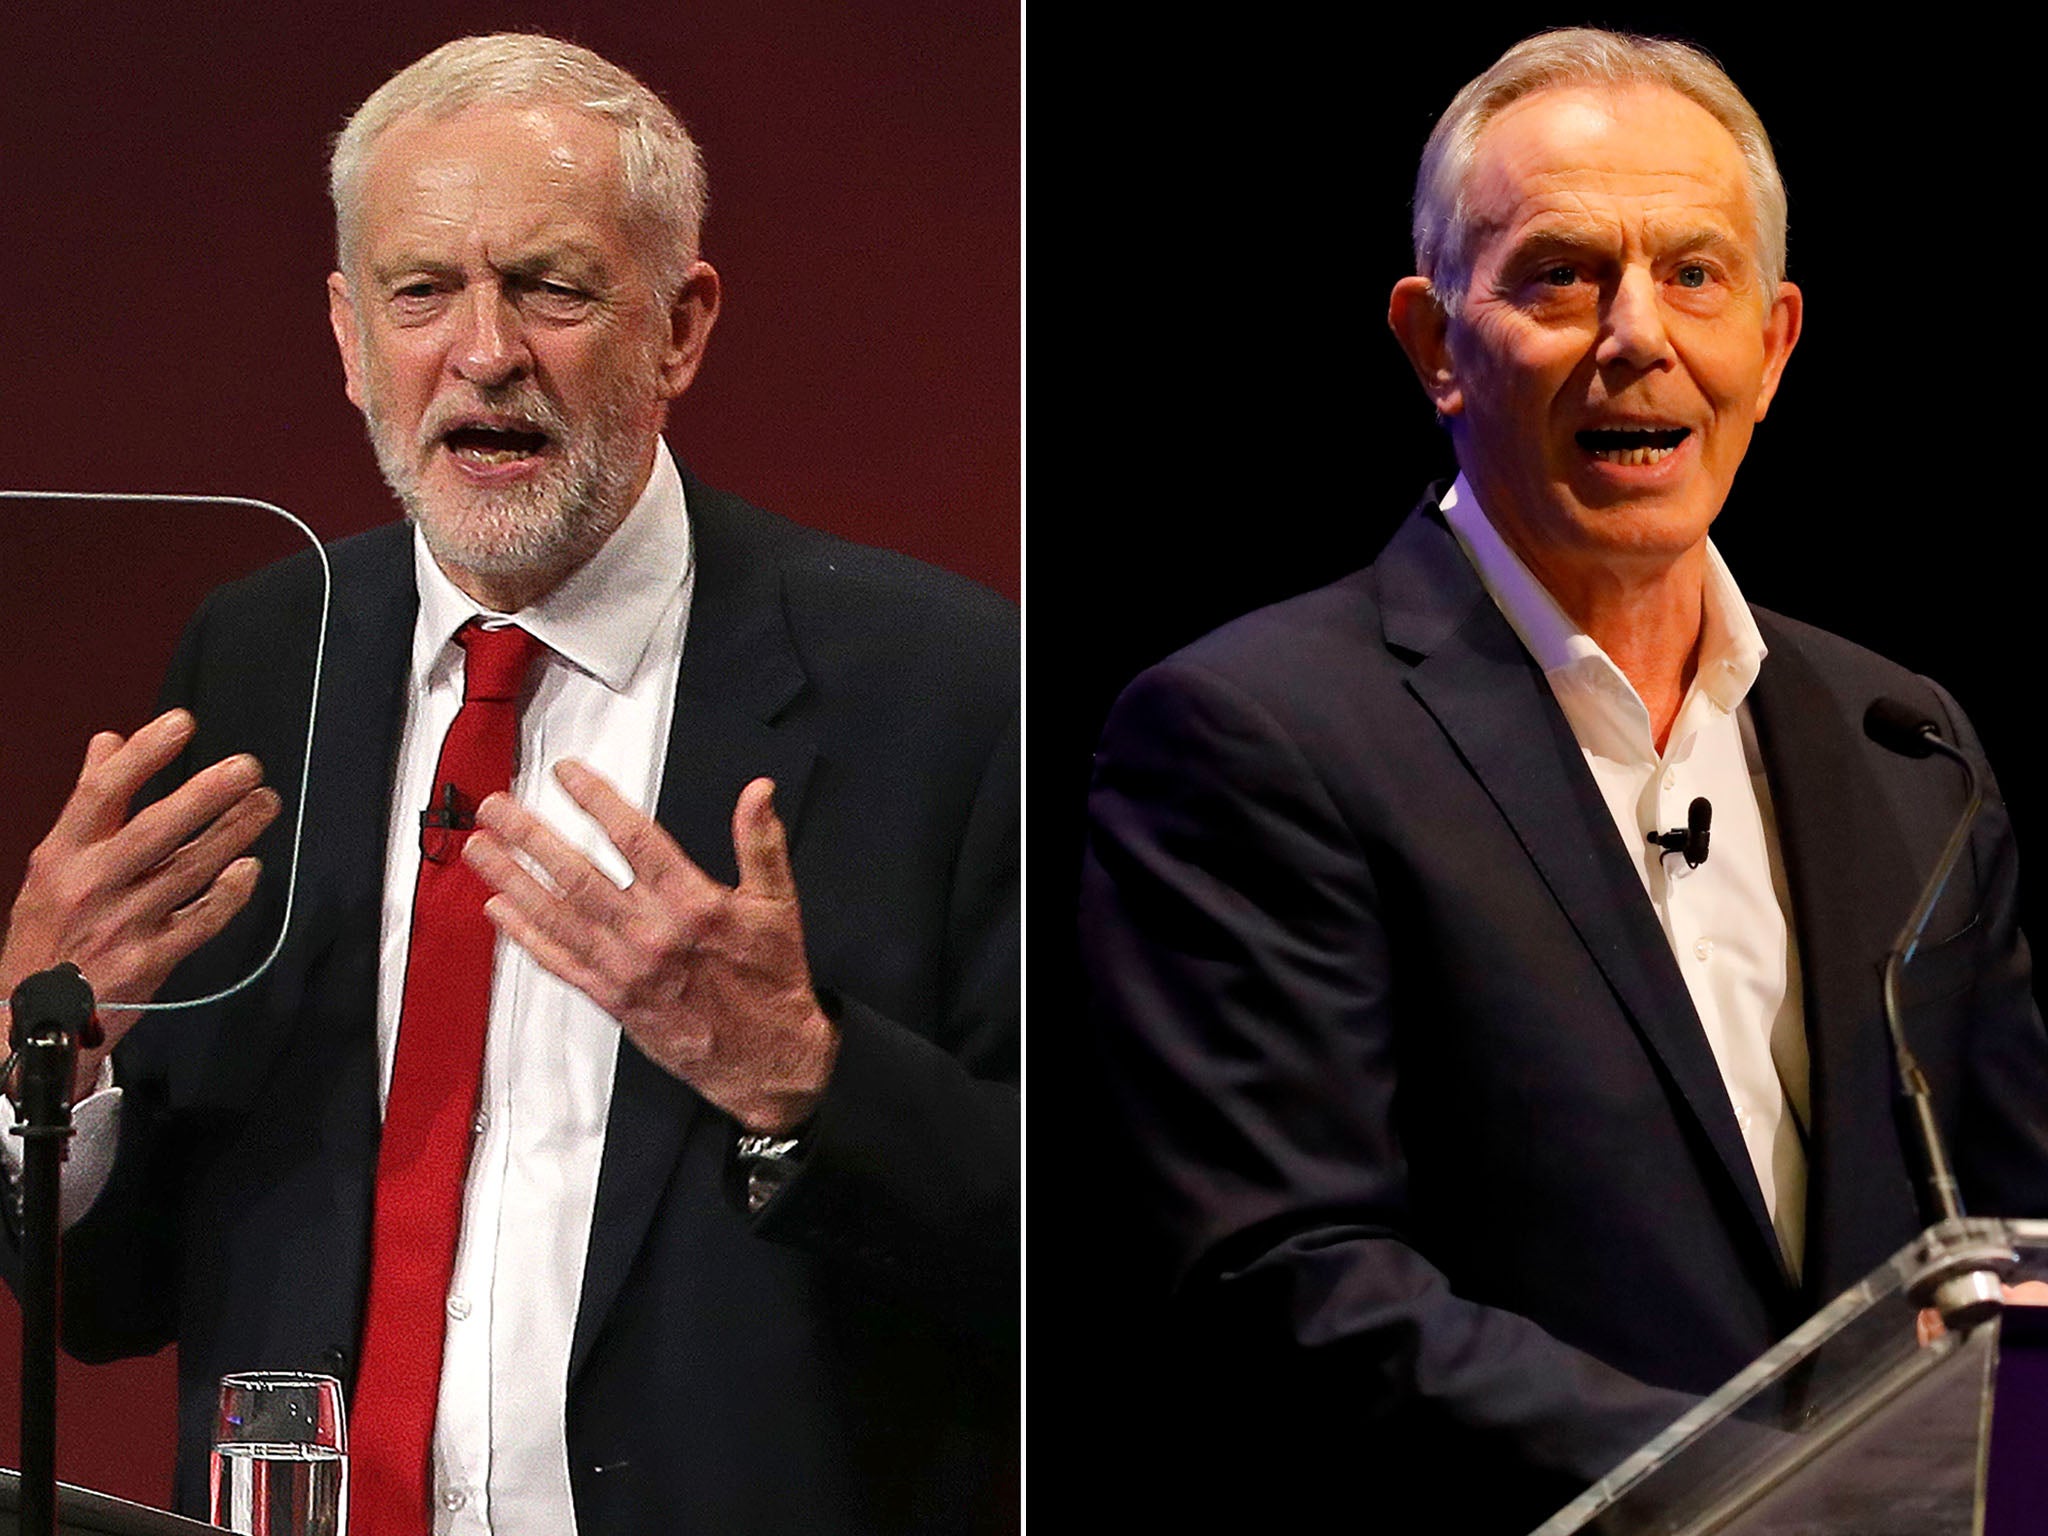 Jeremy Corbyn offered Labour ‘a new sense of purpose’, according to an admirer of Tony Blair